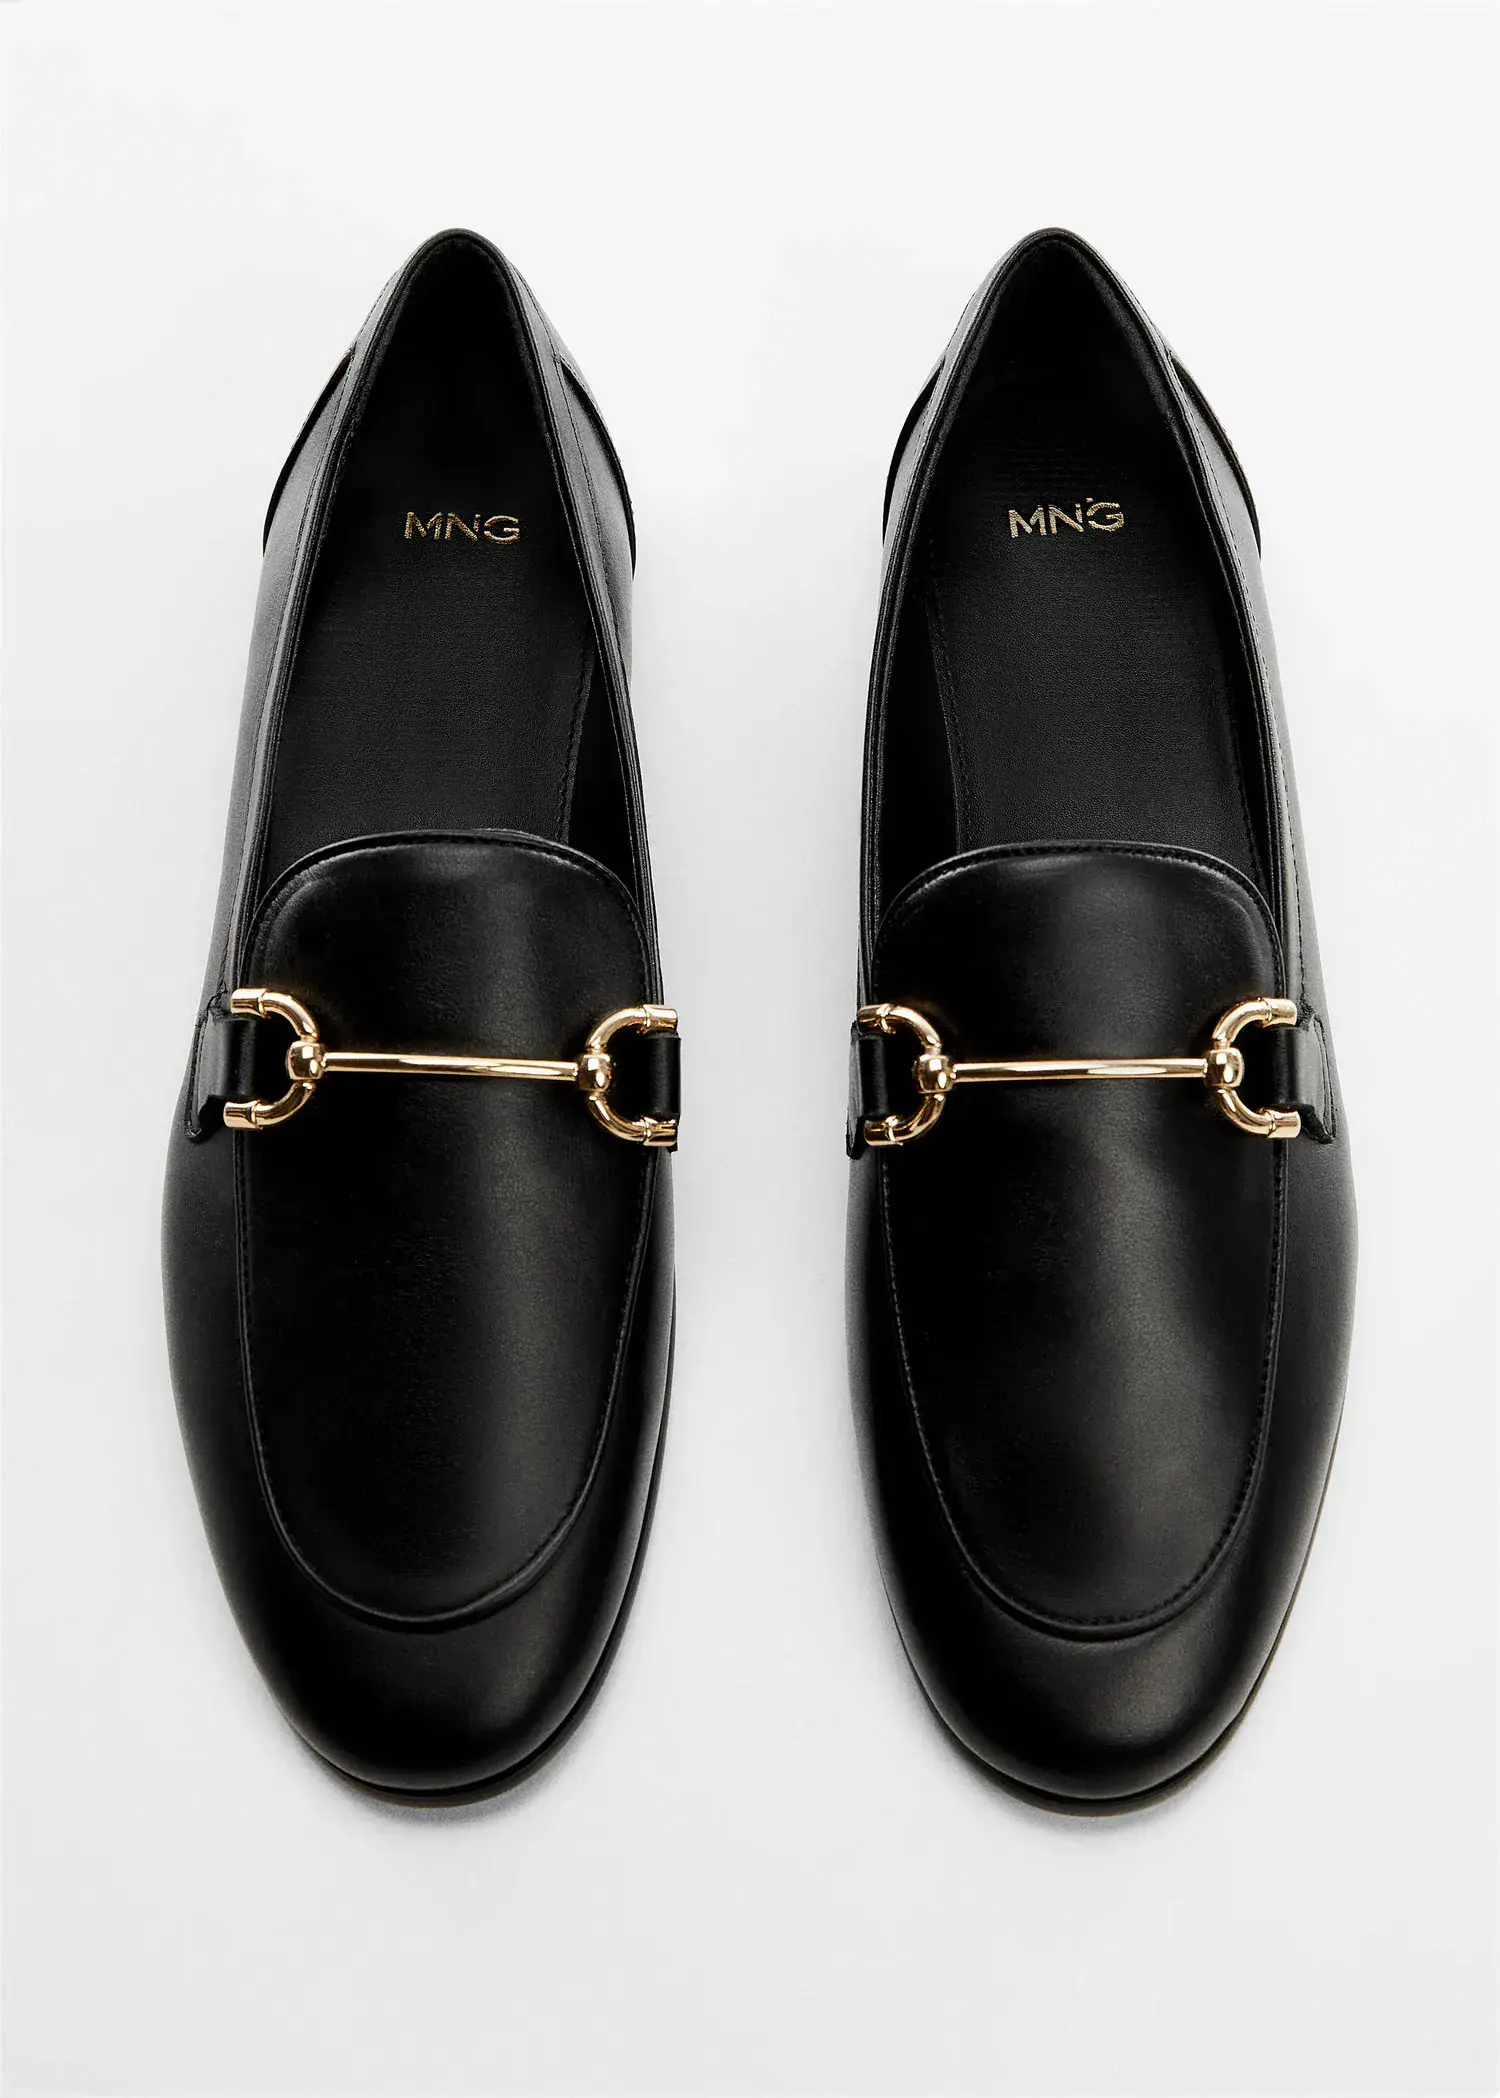 Mango Leather moccasins with metallic detail. 3